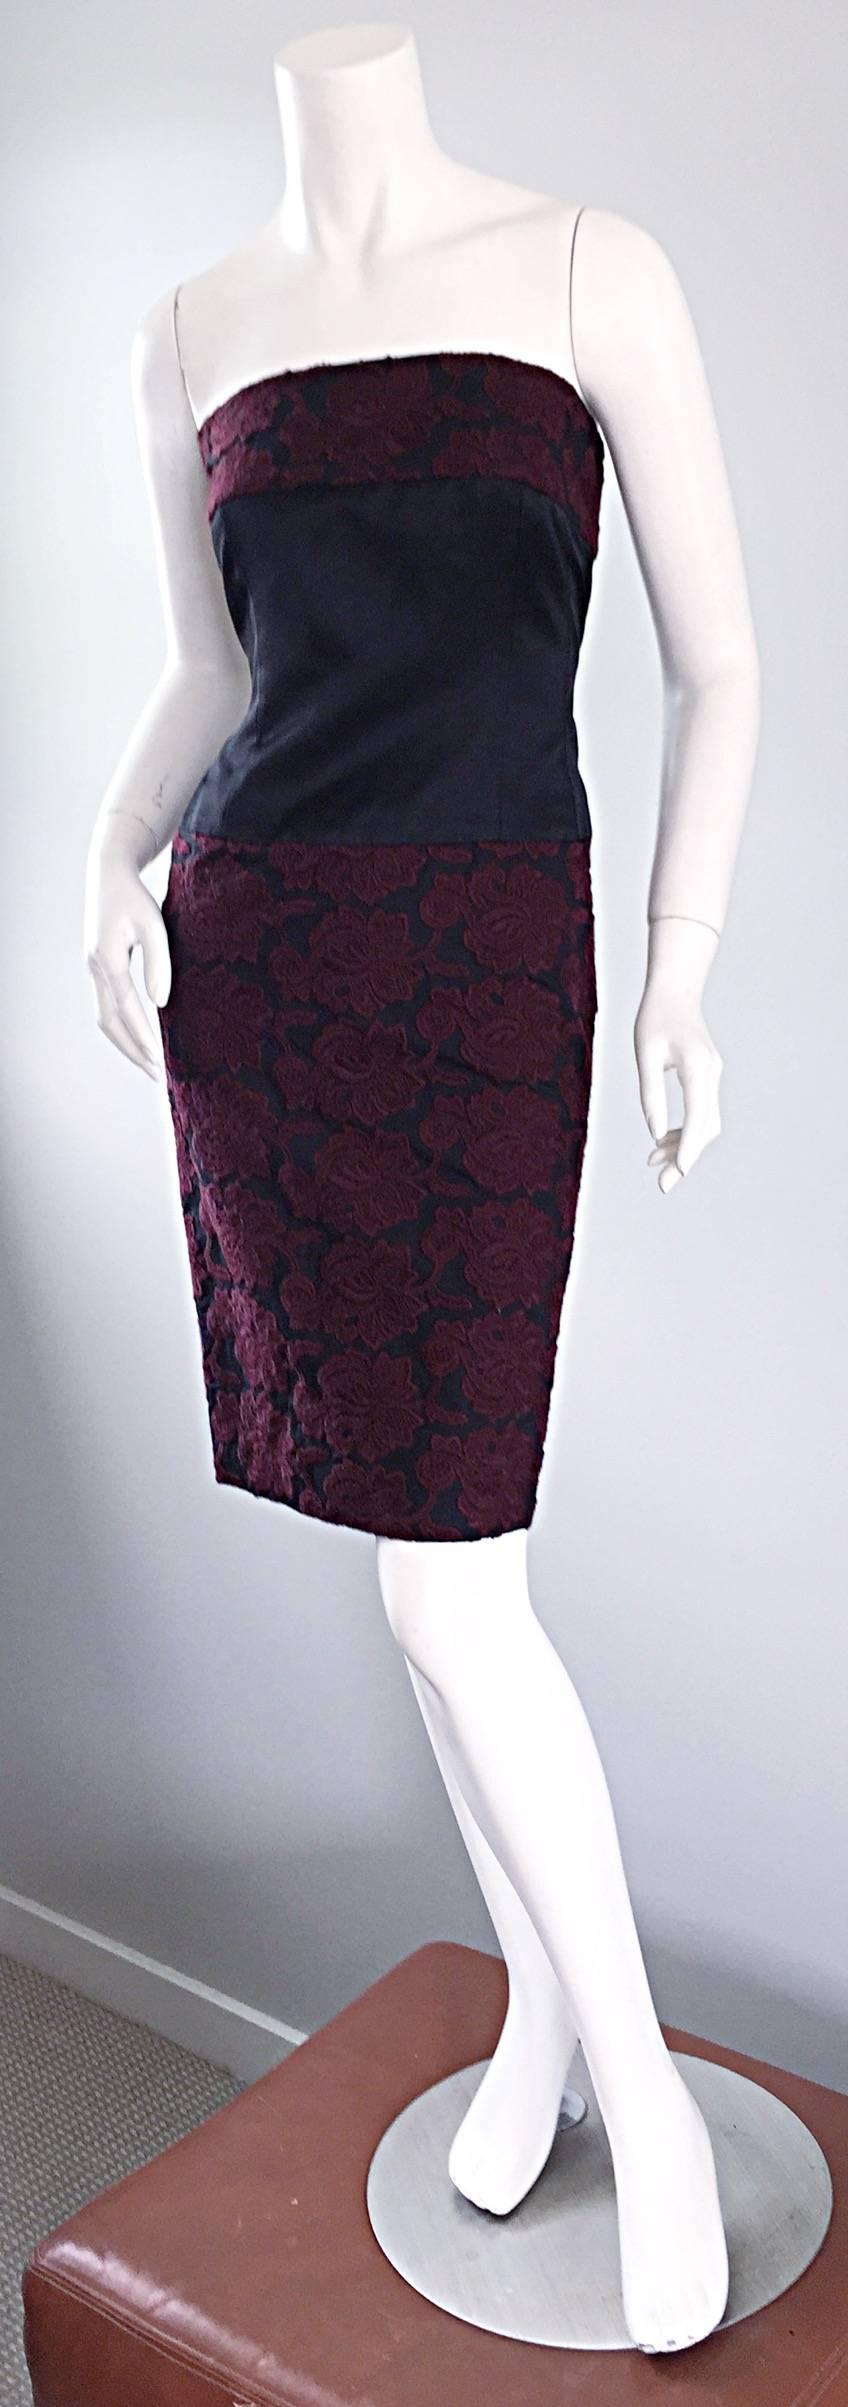 Stunning, figure flattering strapless vintage 1990s dress by Paola Quadretti! Black silk bodice, with maroon/burgundy embroidered floral print. Most of the work on this dress was done by hand--Impeccable construction! Looks great alone, or can be